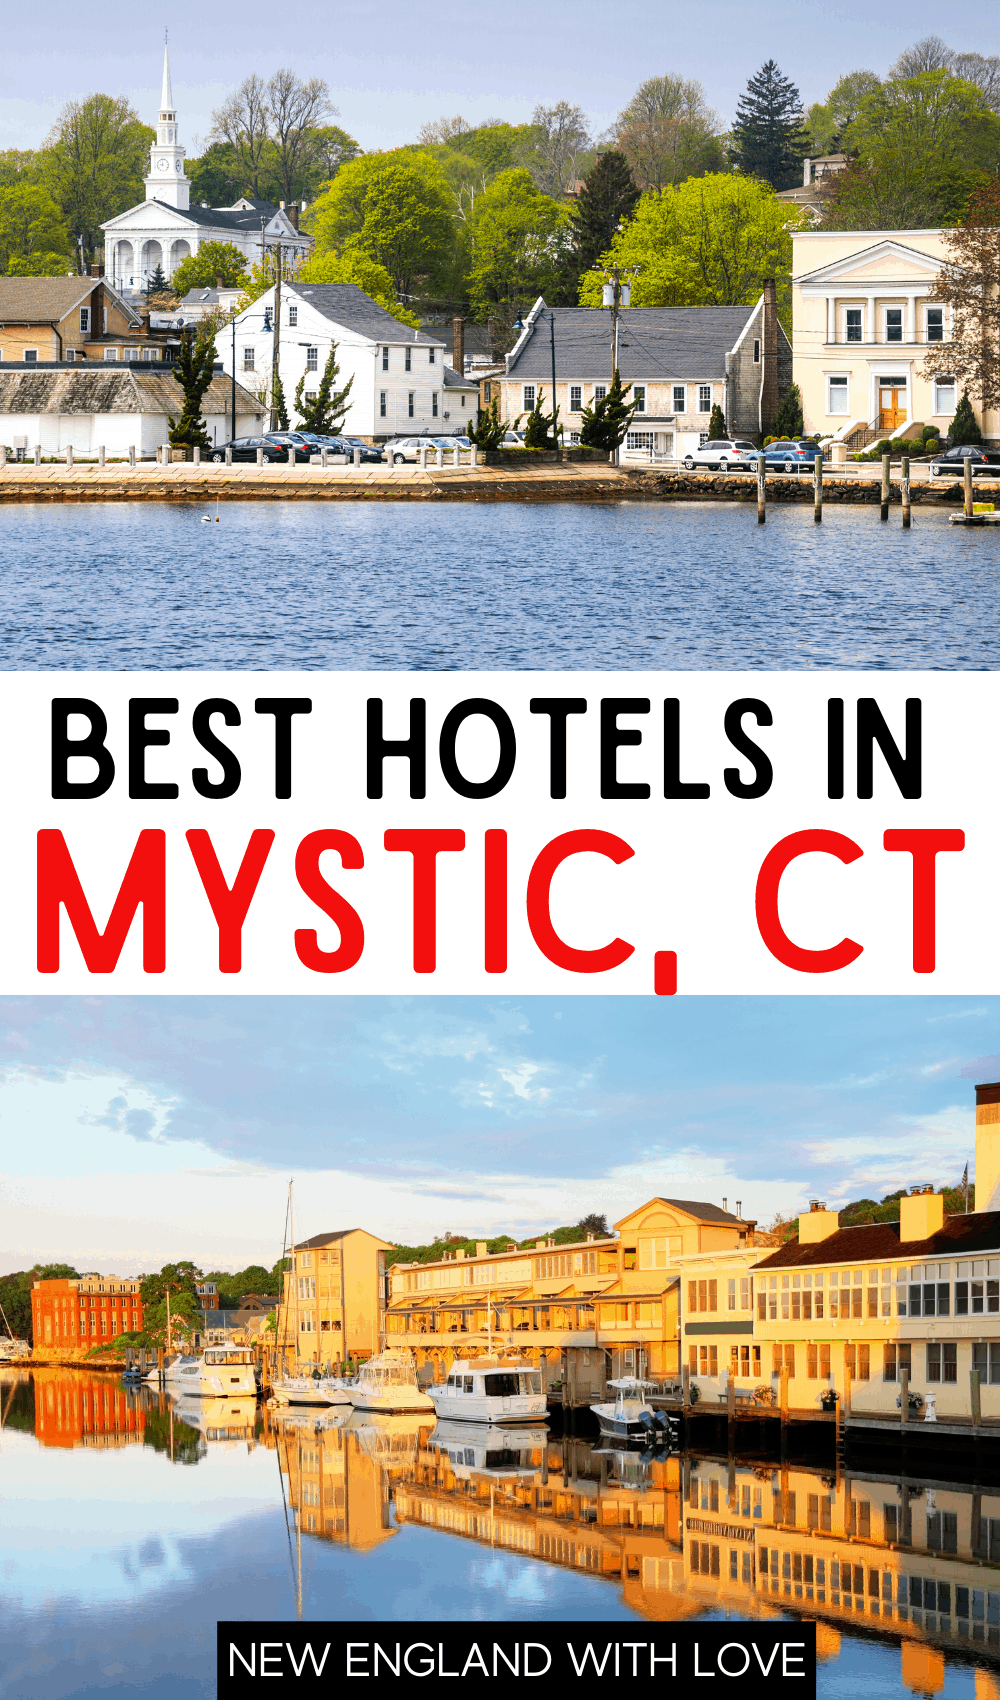 Pinterest graphic reading "BEST HOTELS IN MYSTIC, CT"